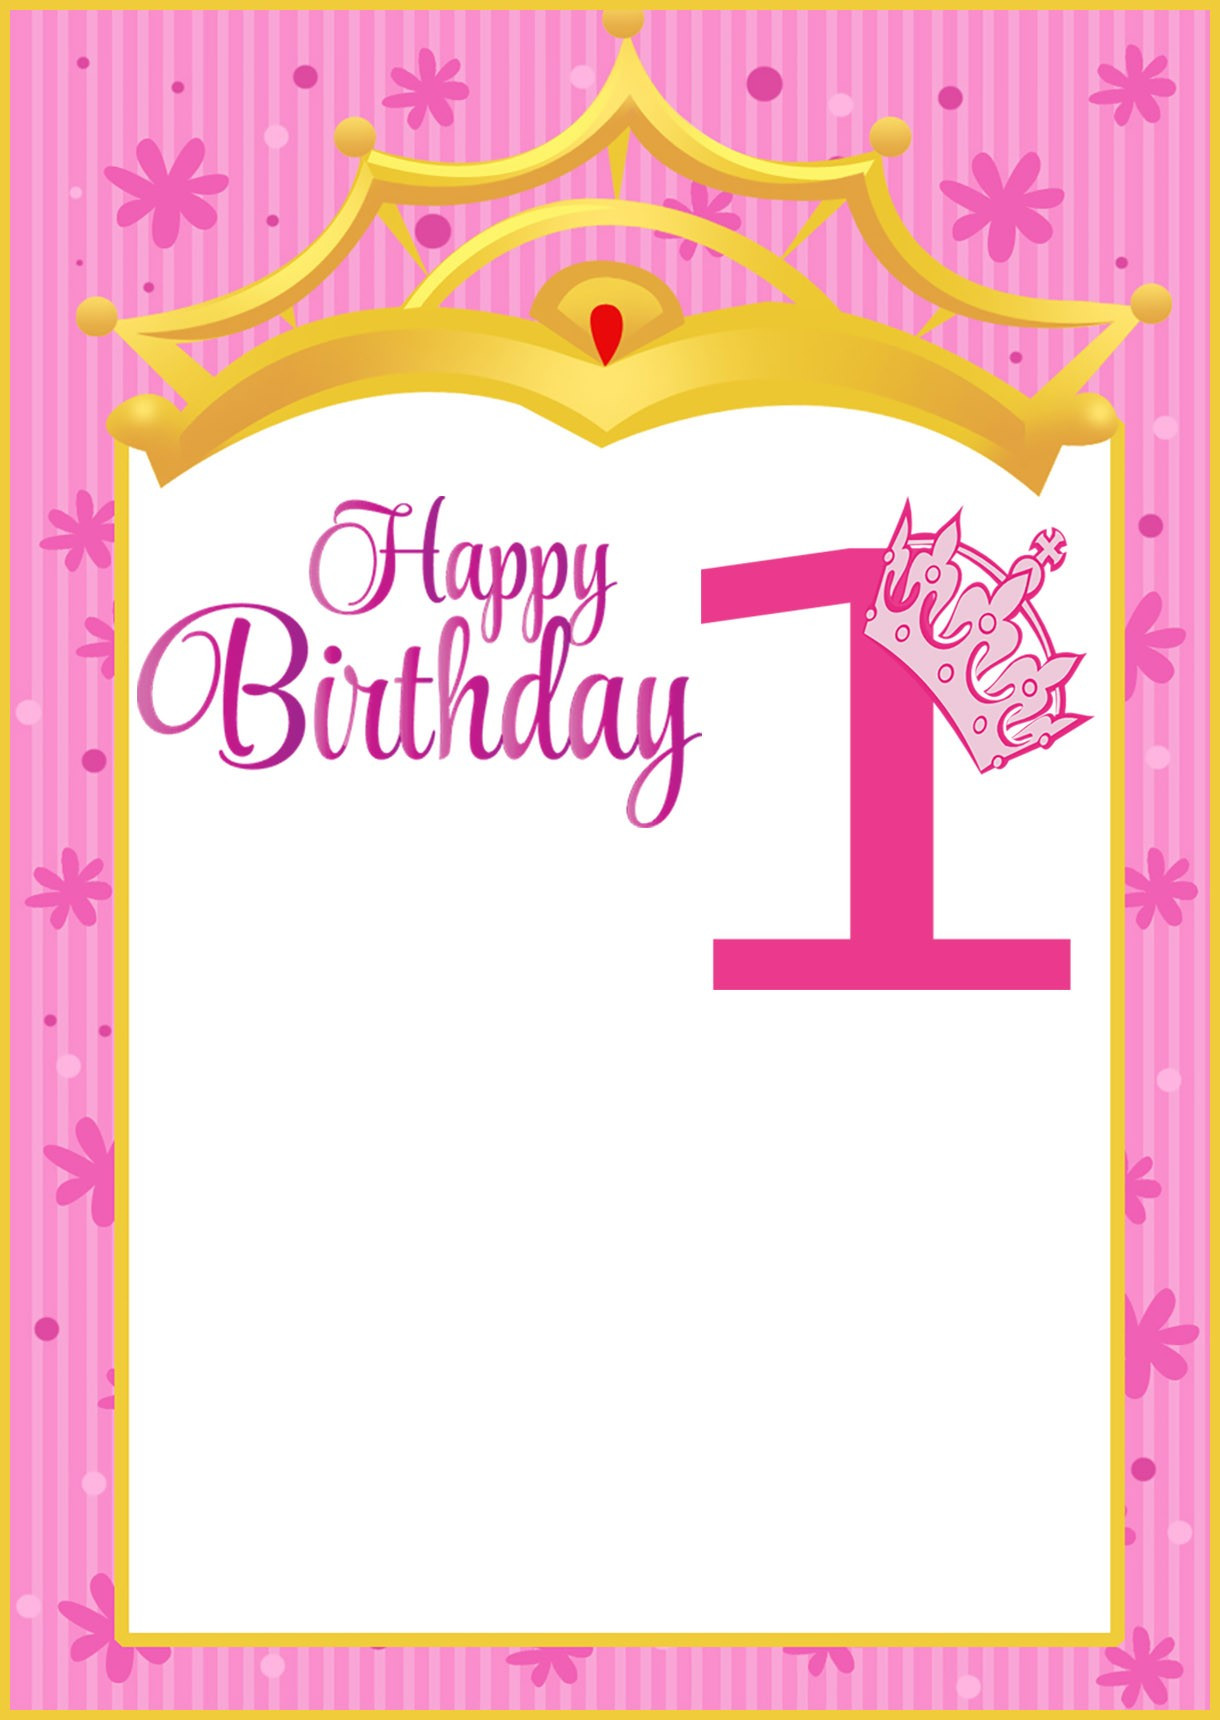 1st Birthday Free Printable Invitations
 How You can Make First Birthday Invitations Special